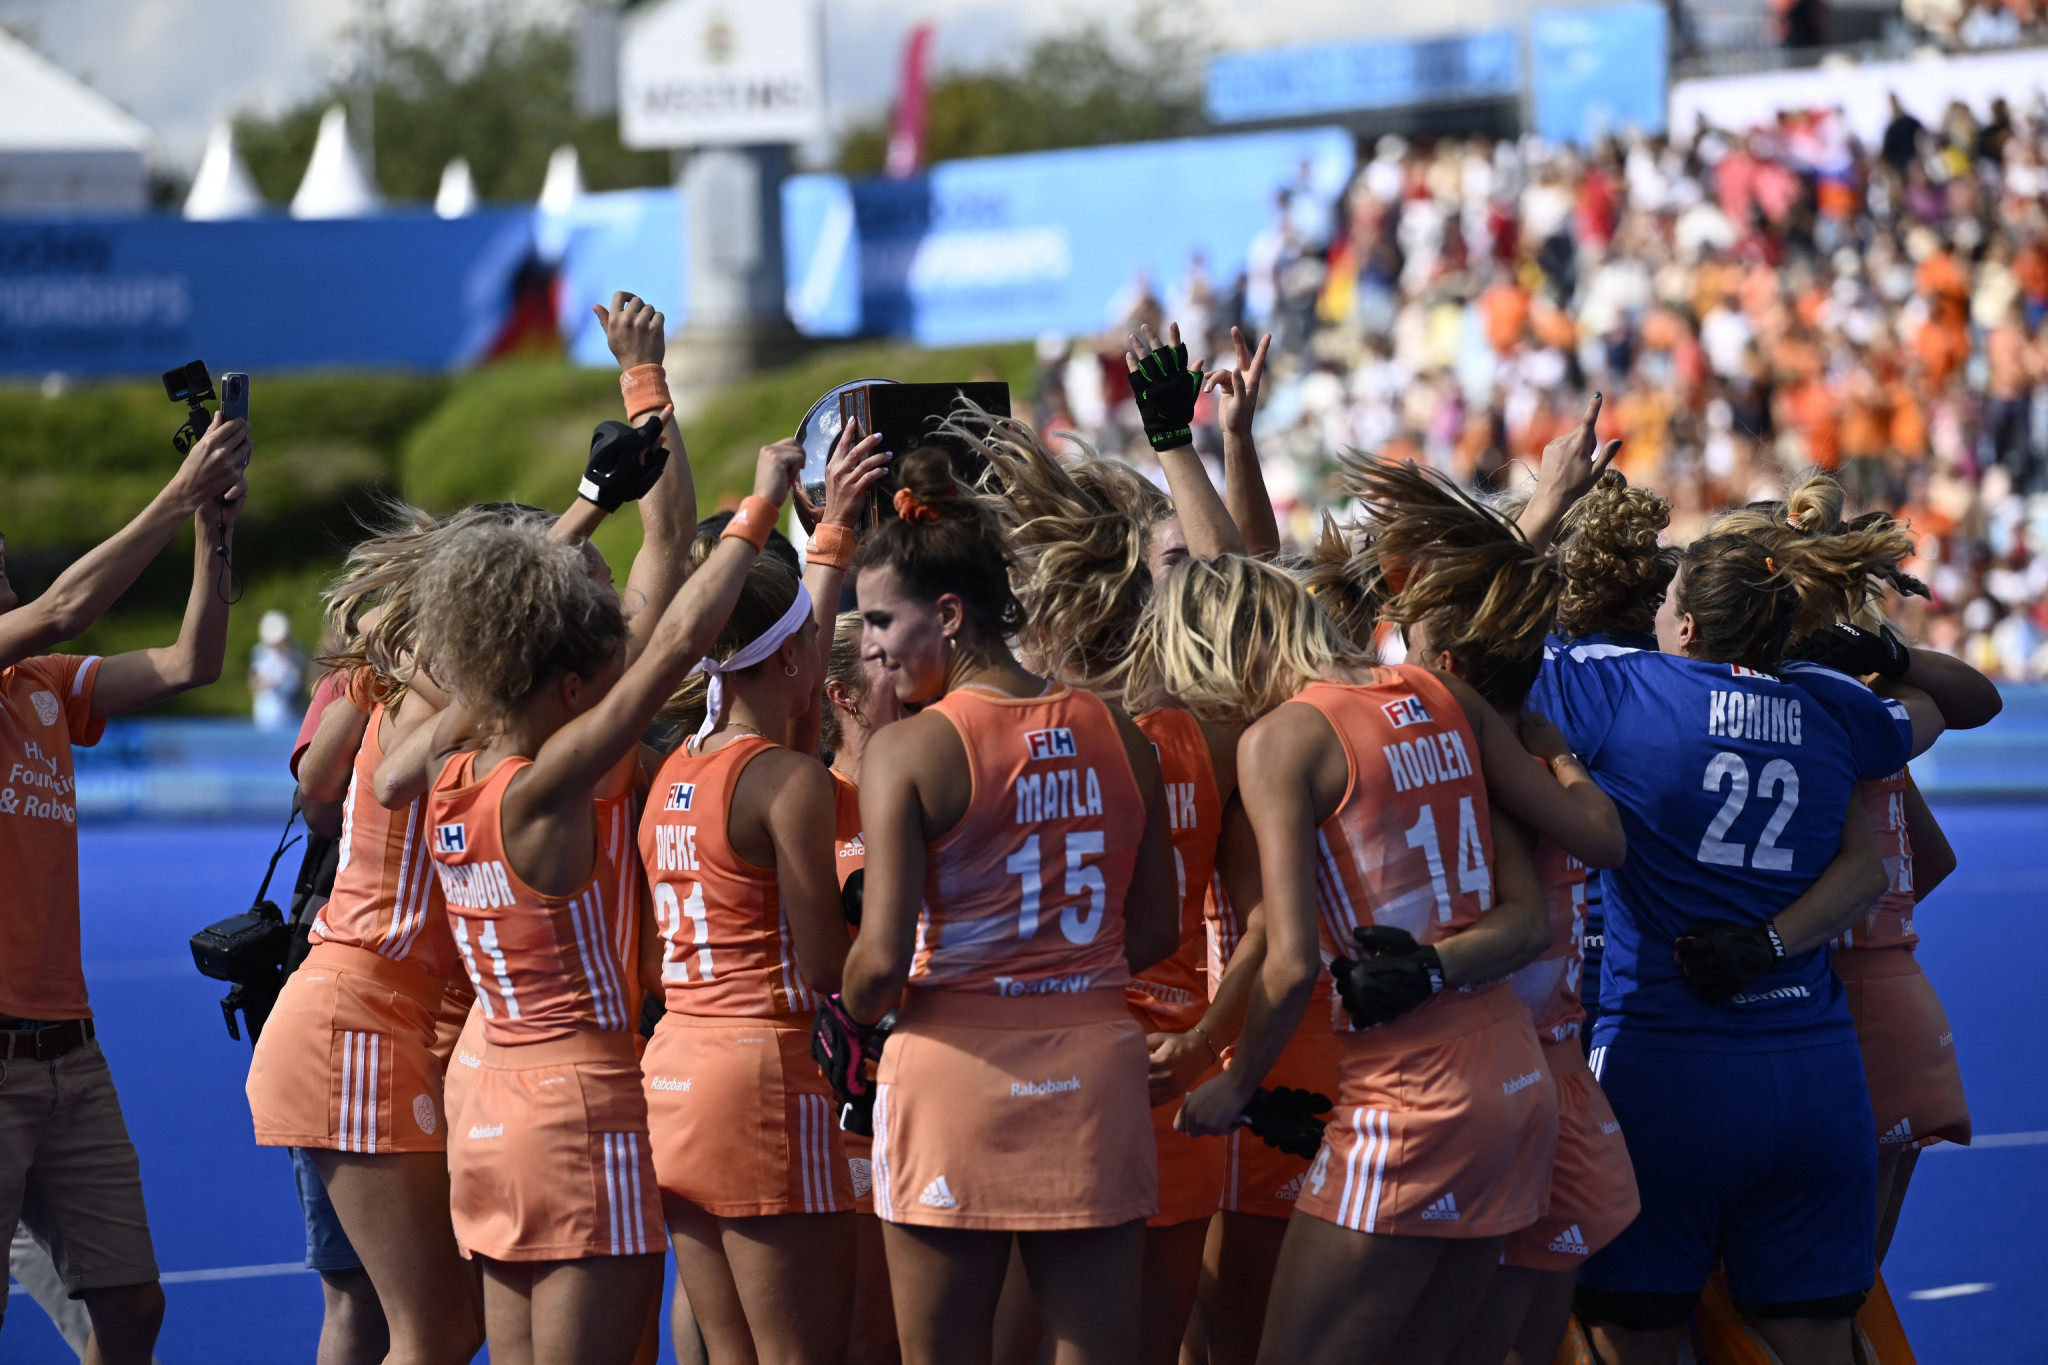 Double Dutch delight as they win men’s and women’s EuroHockey Championships titles and earn Paris 2024 places